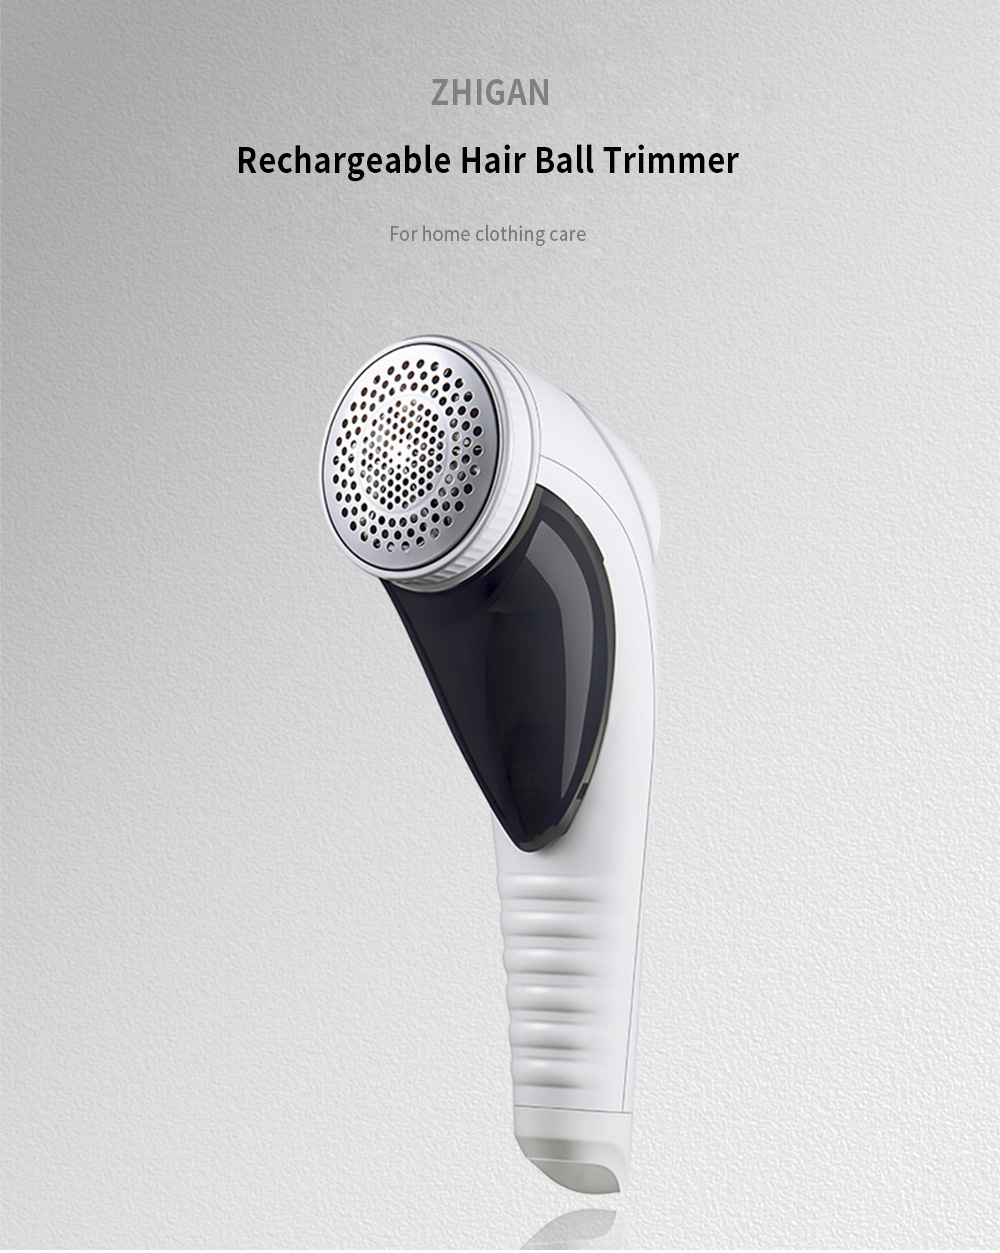 ZHIGAN M17 Rechargeable Pilling Machine Fabric Razor Clothes Hair Ball Trimmer